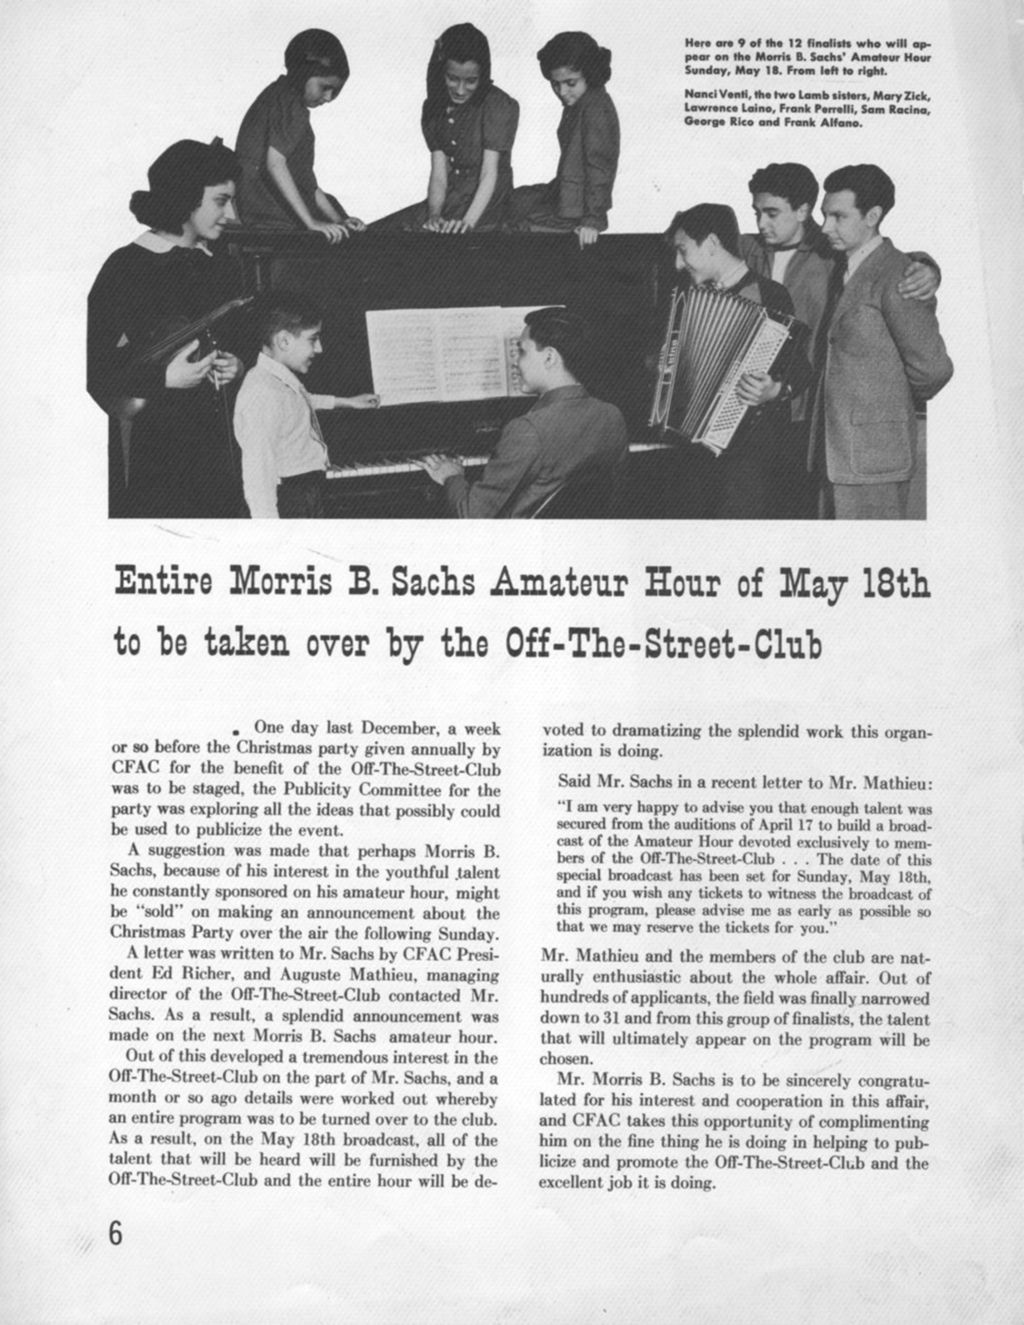 Off-The-Street-Club members appearing on Morris B. Sachs Amateur Hour